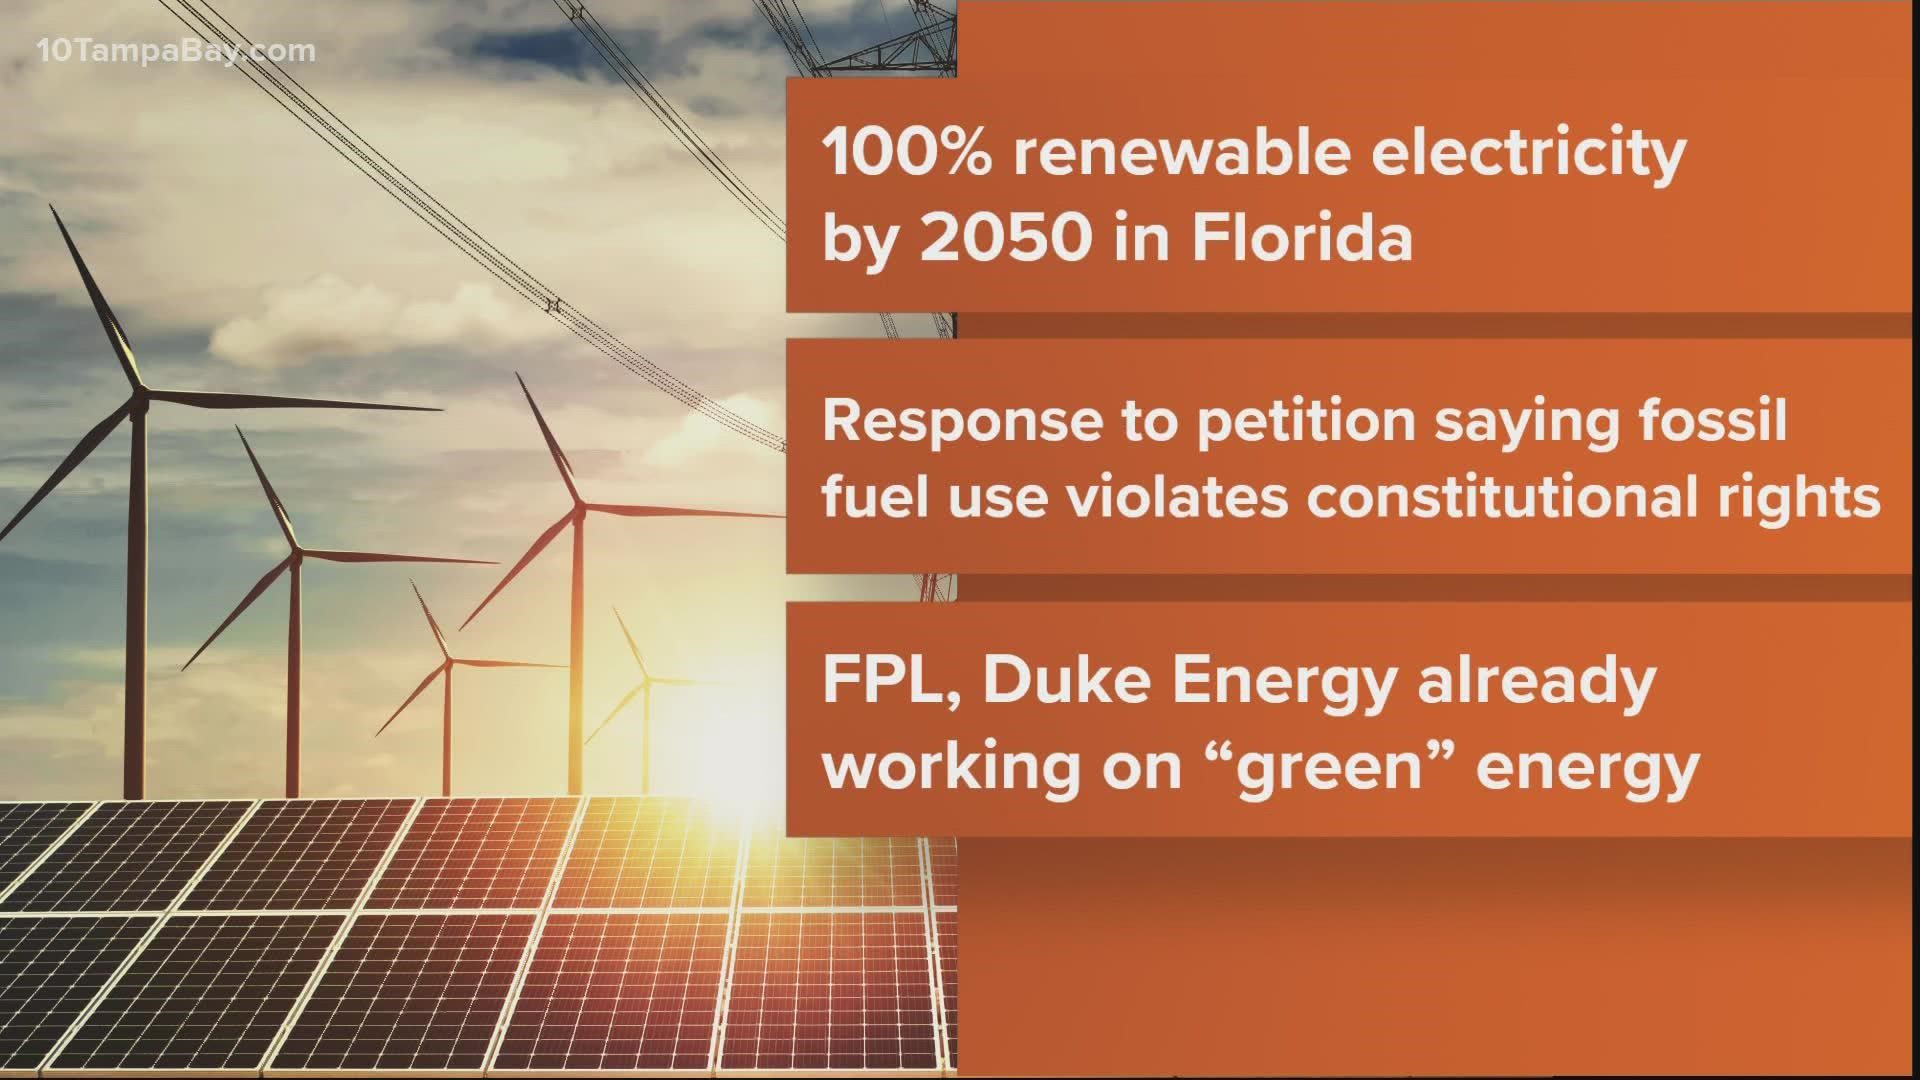 The proposal stems from a lengthy court battle involving dozens of young people who claim Florida is violating their constitutional rights by promoting fossil fuels.